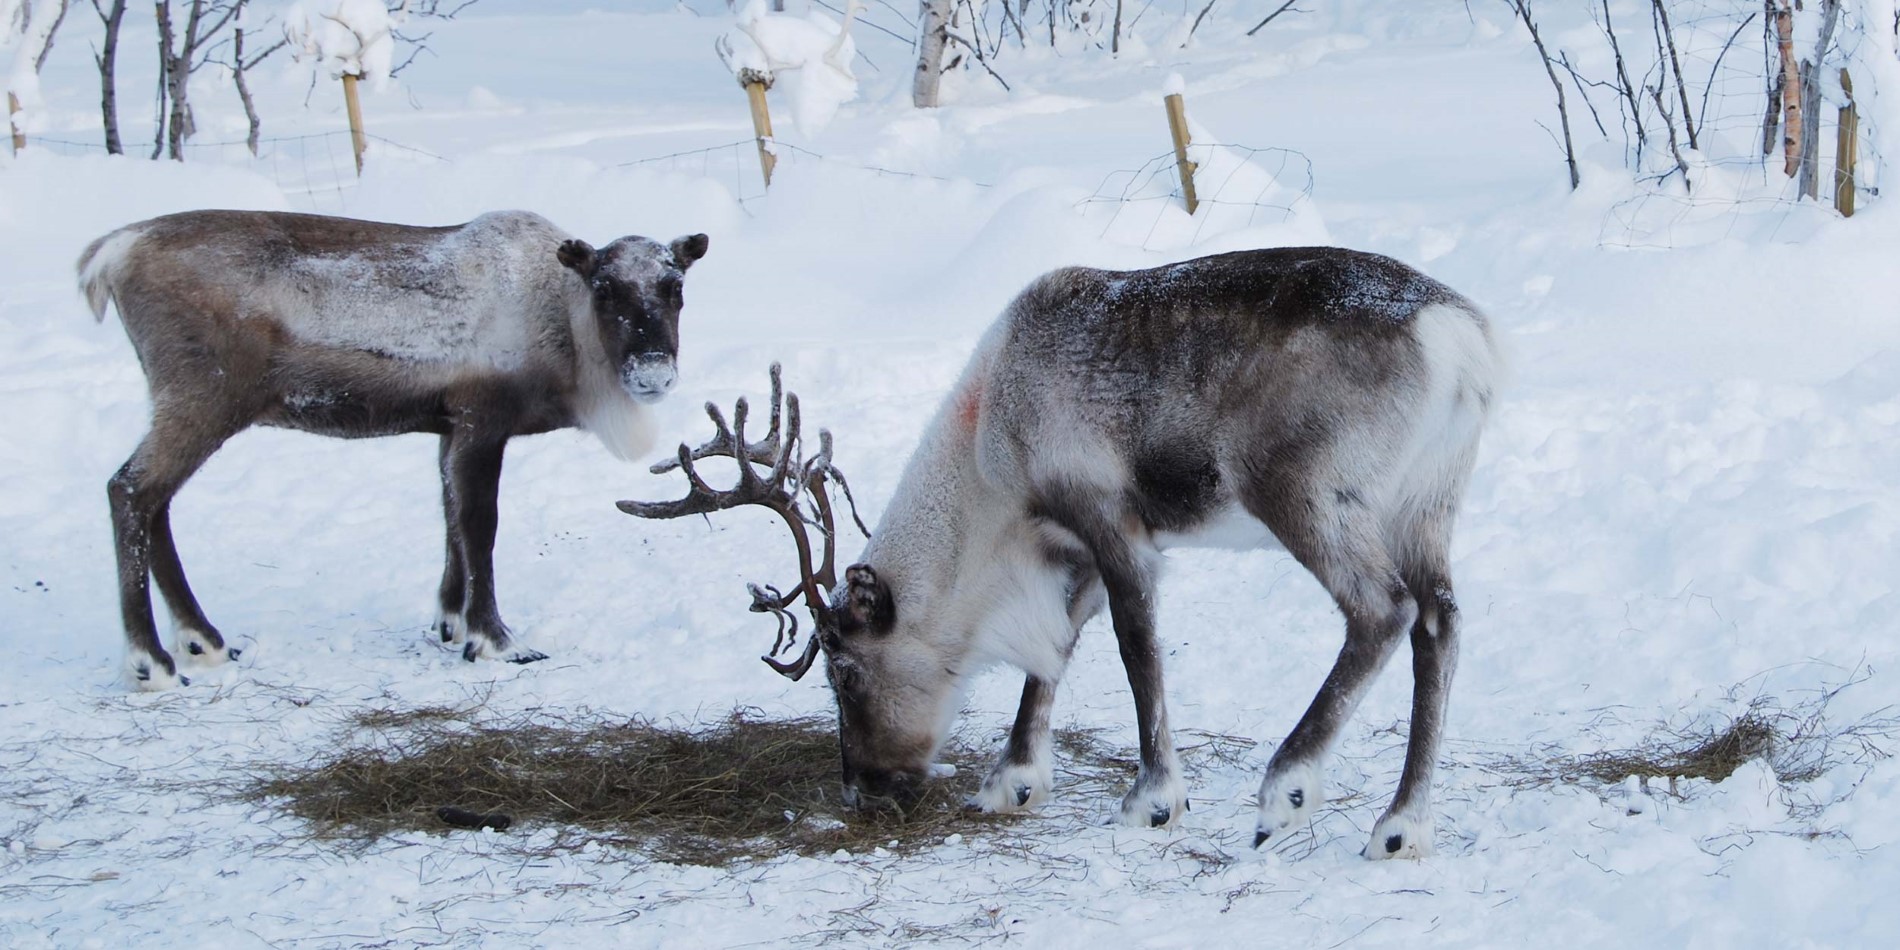 Reindeer feed by digging through the snow during winter